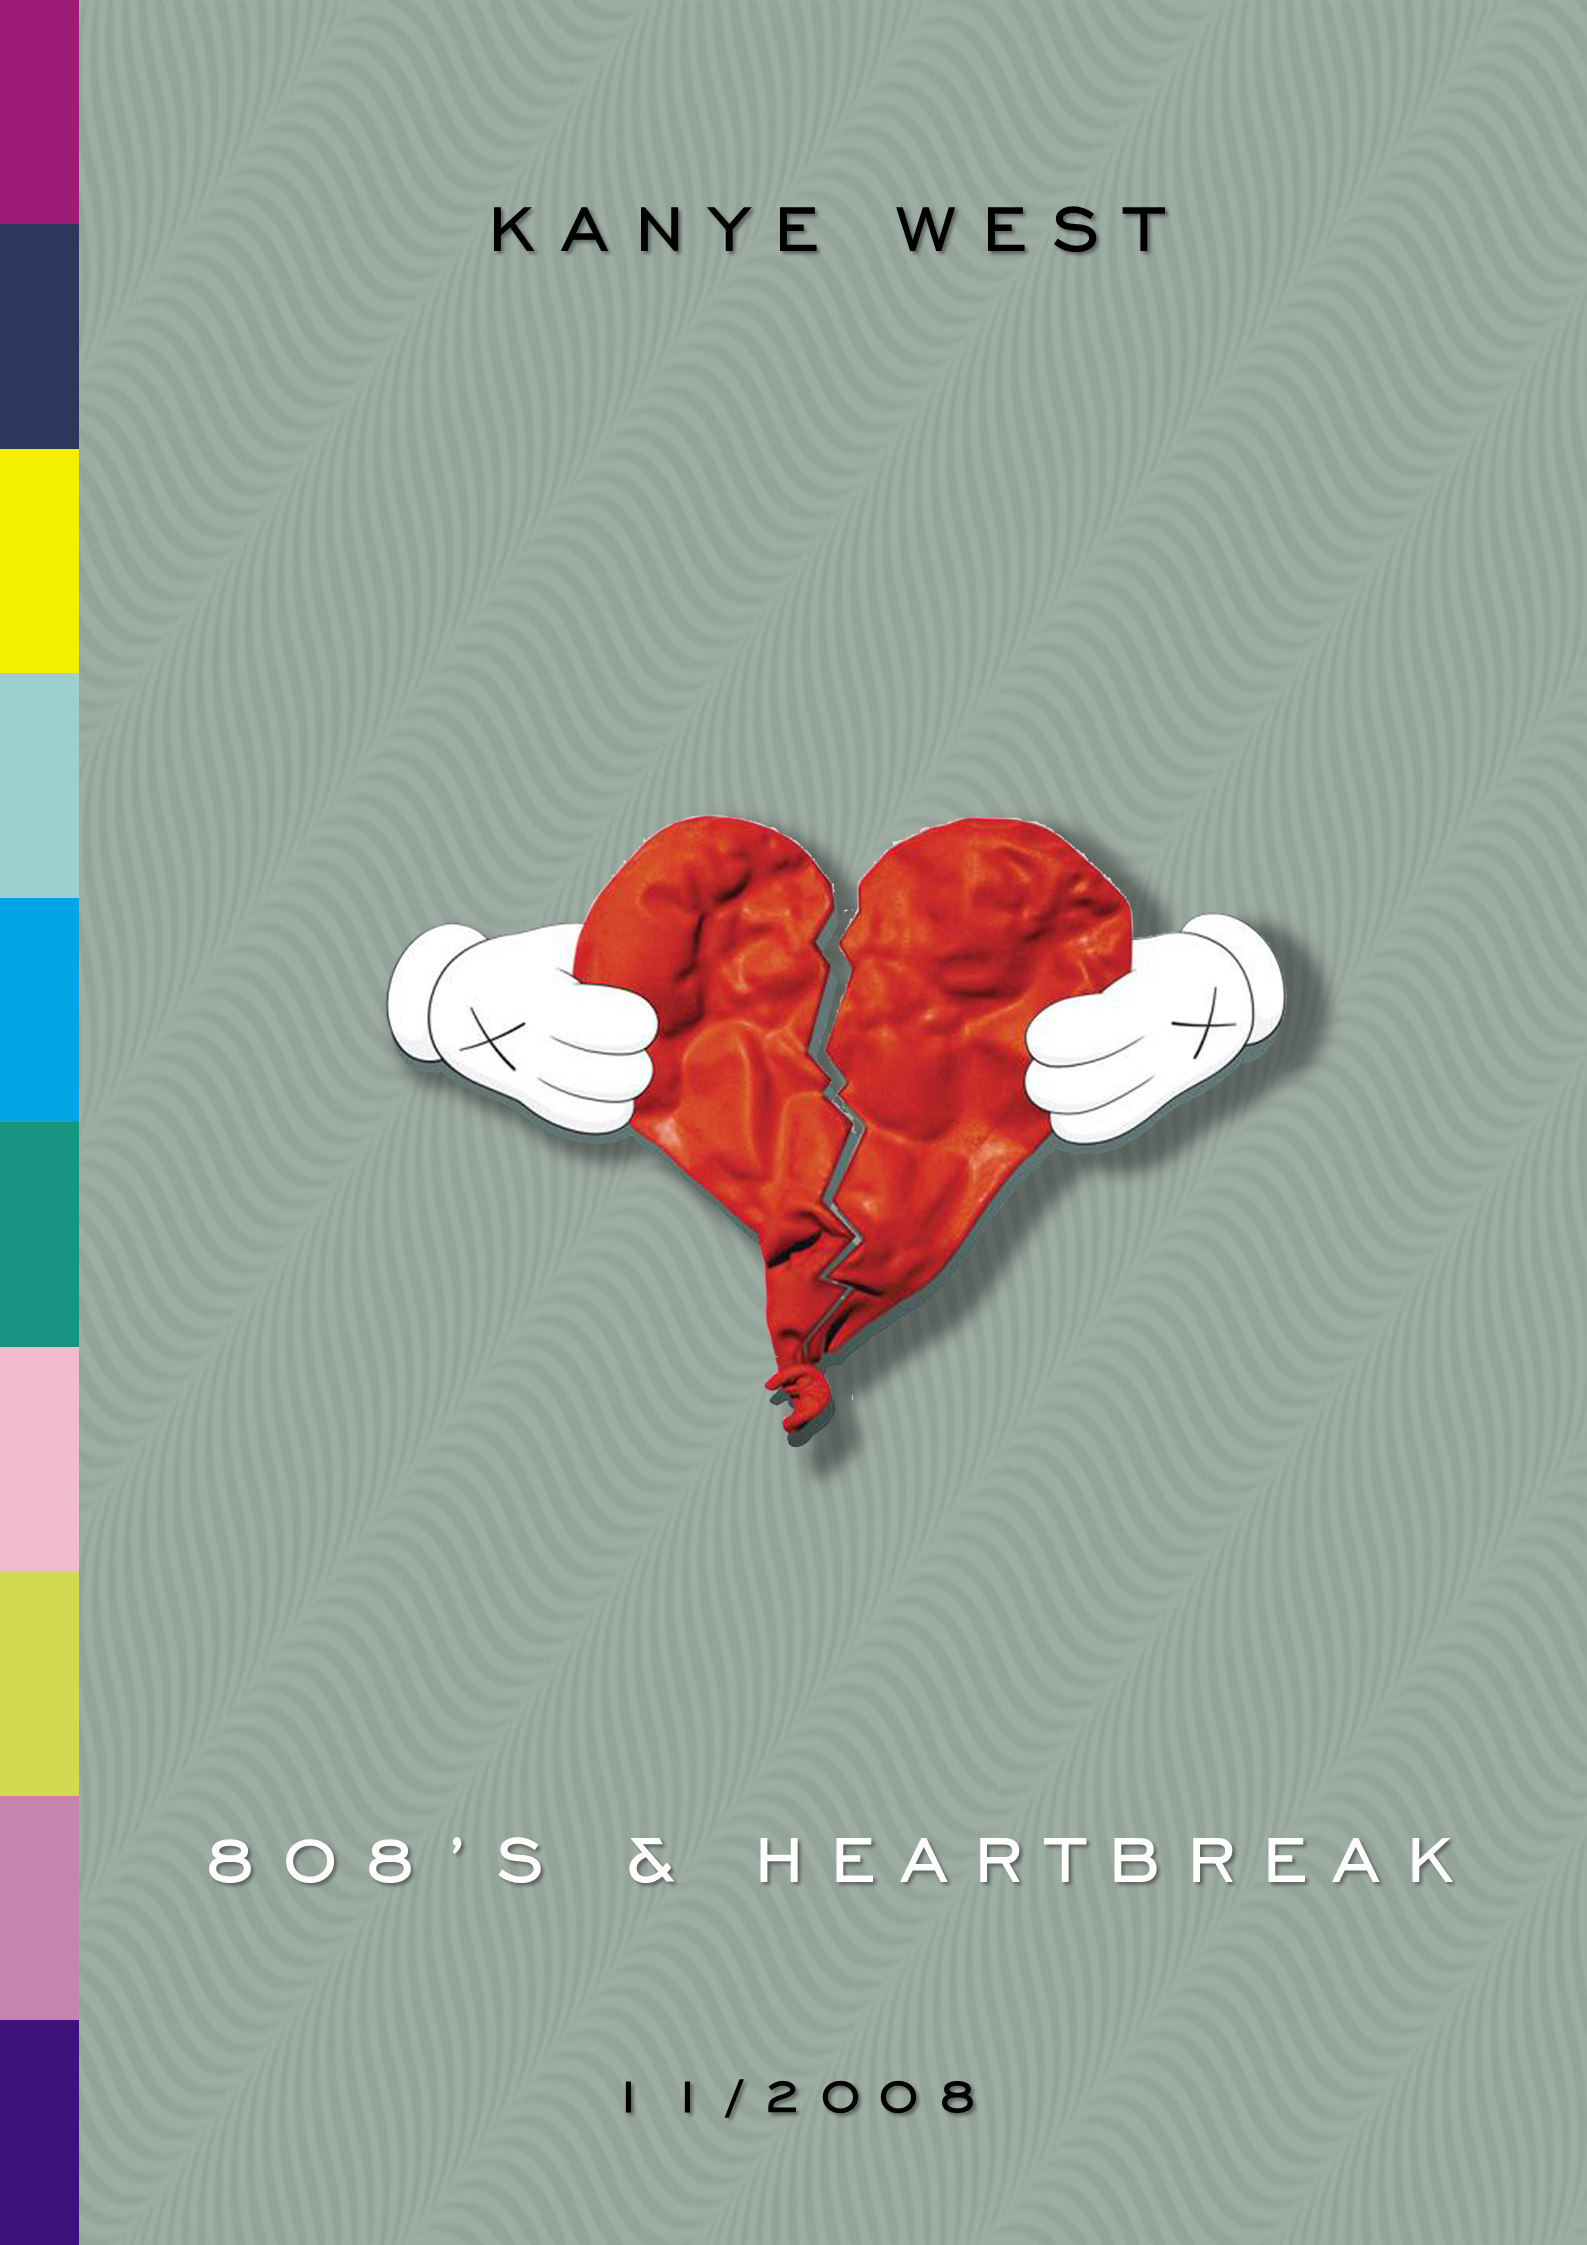 Kanye West 808's and Heartbreak Poster. Etsys & heartbreak, Heartbreak art, Heartbreak